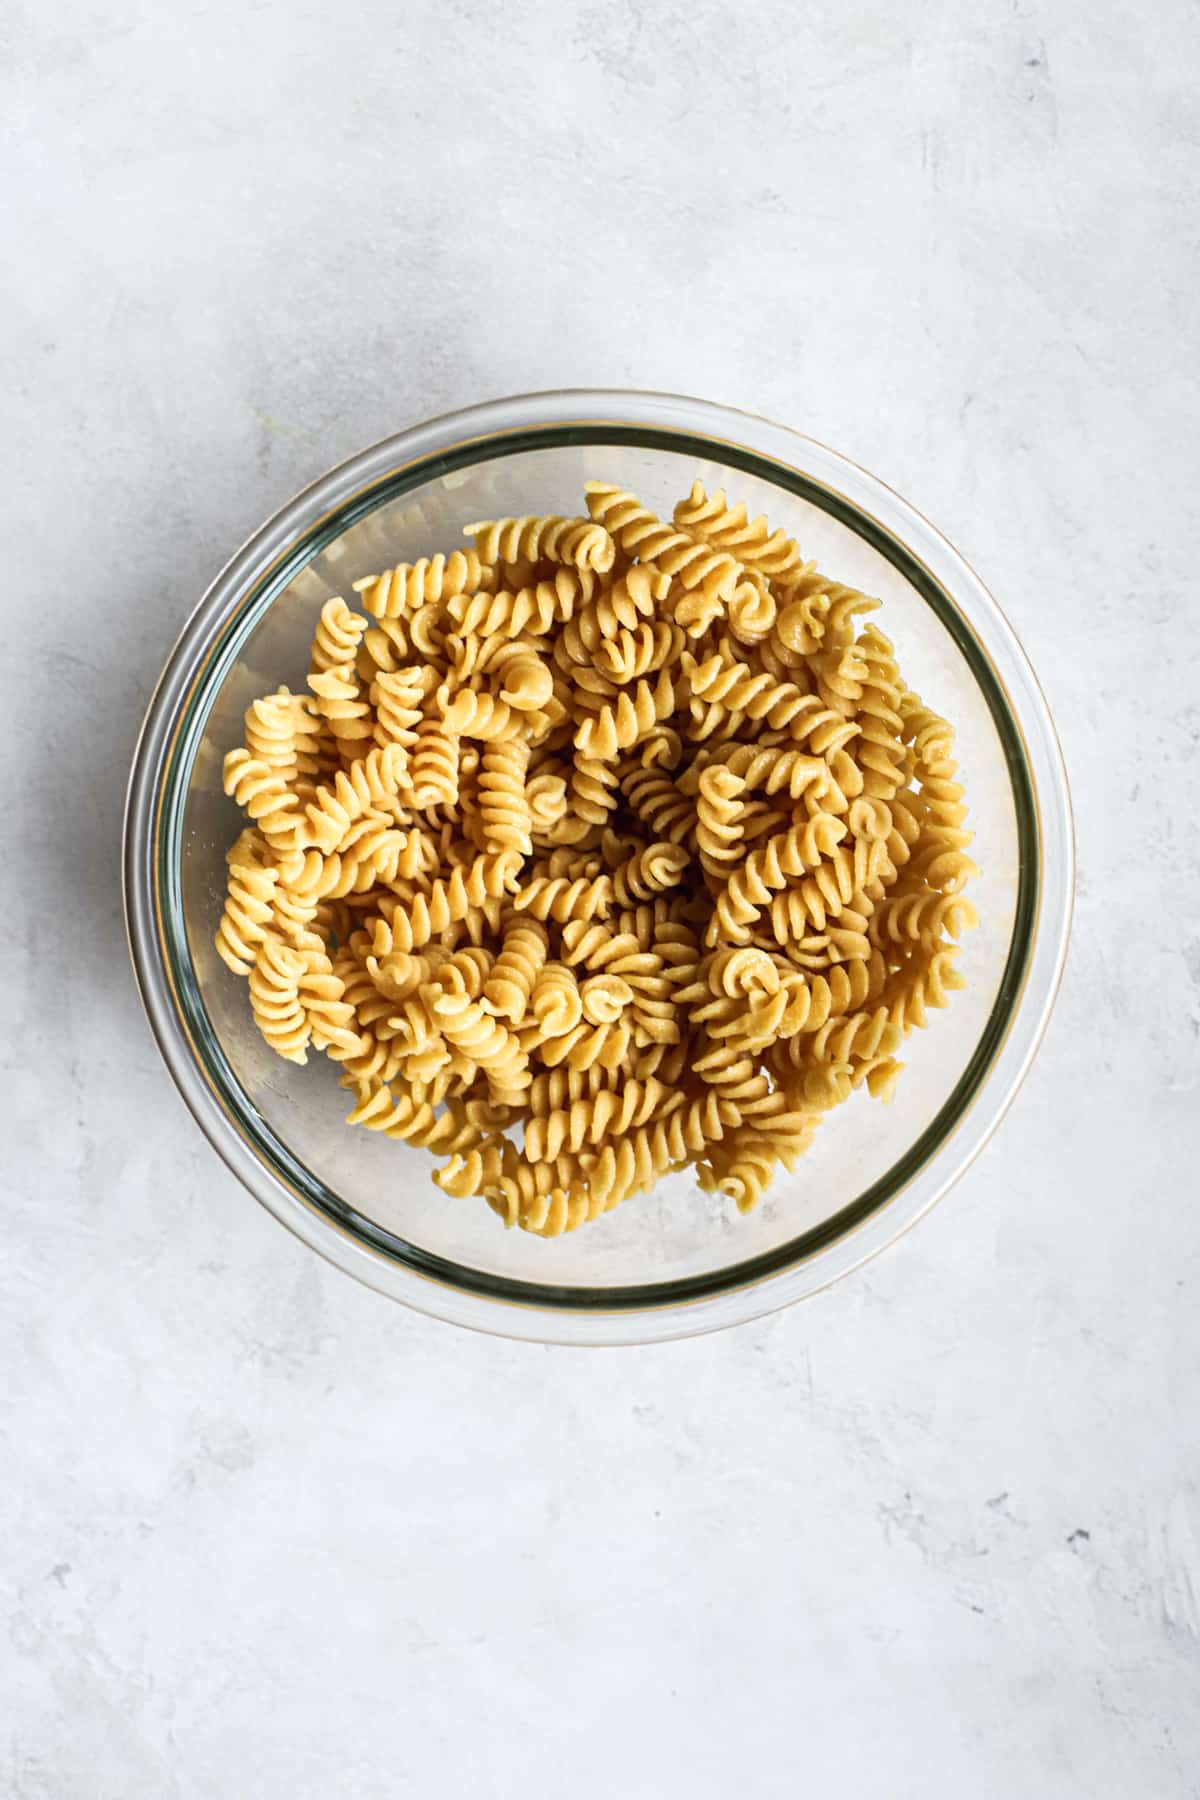 Cooked rotini in clear glass bowl on gray and white surface